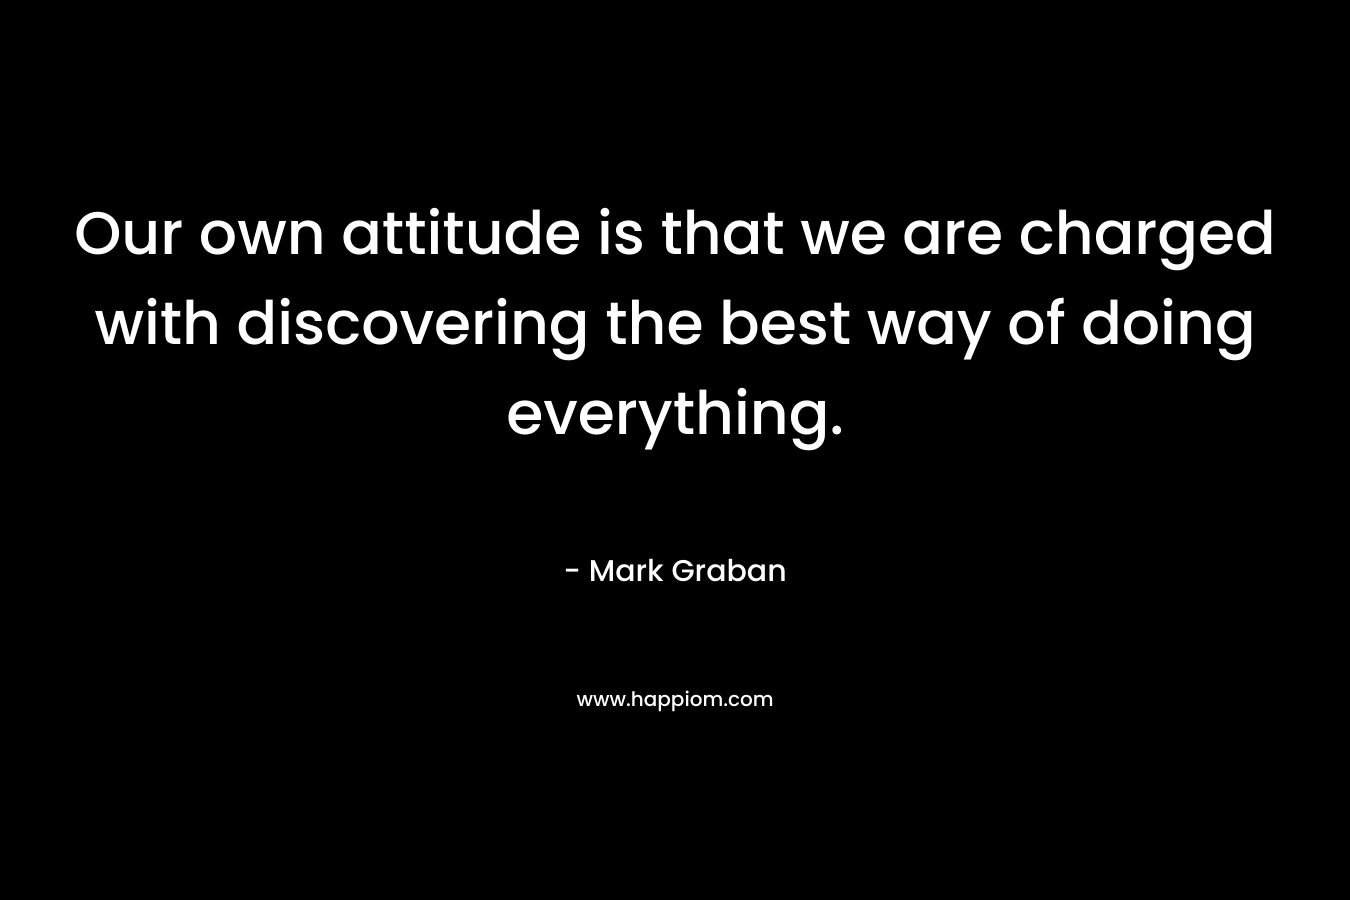 Our own attitude is that we are charged with discovering the best way of doing everything. – Mark Graban